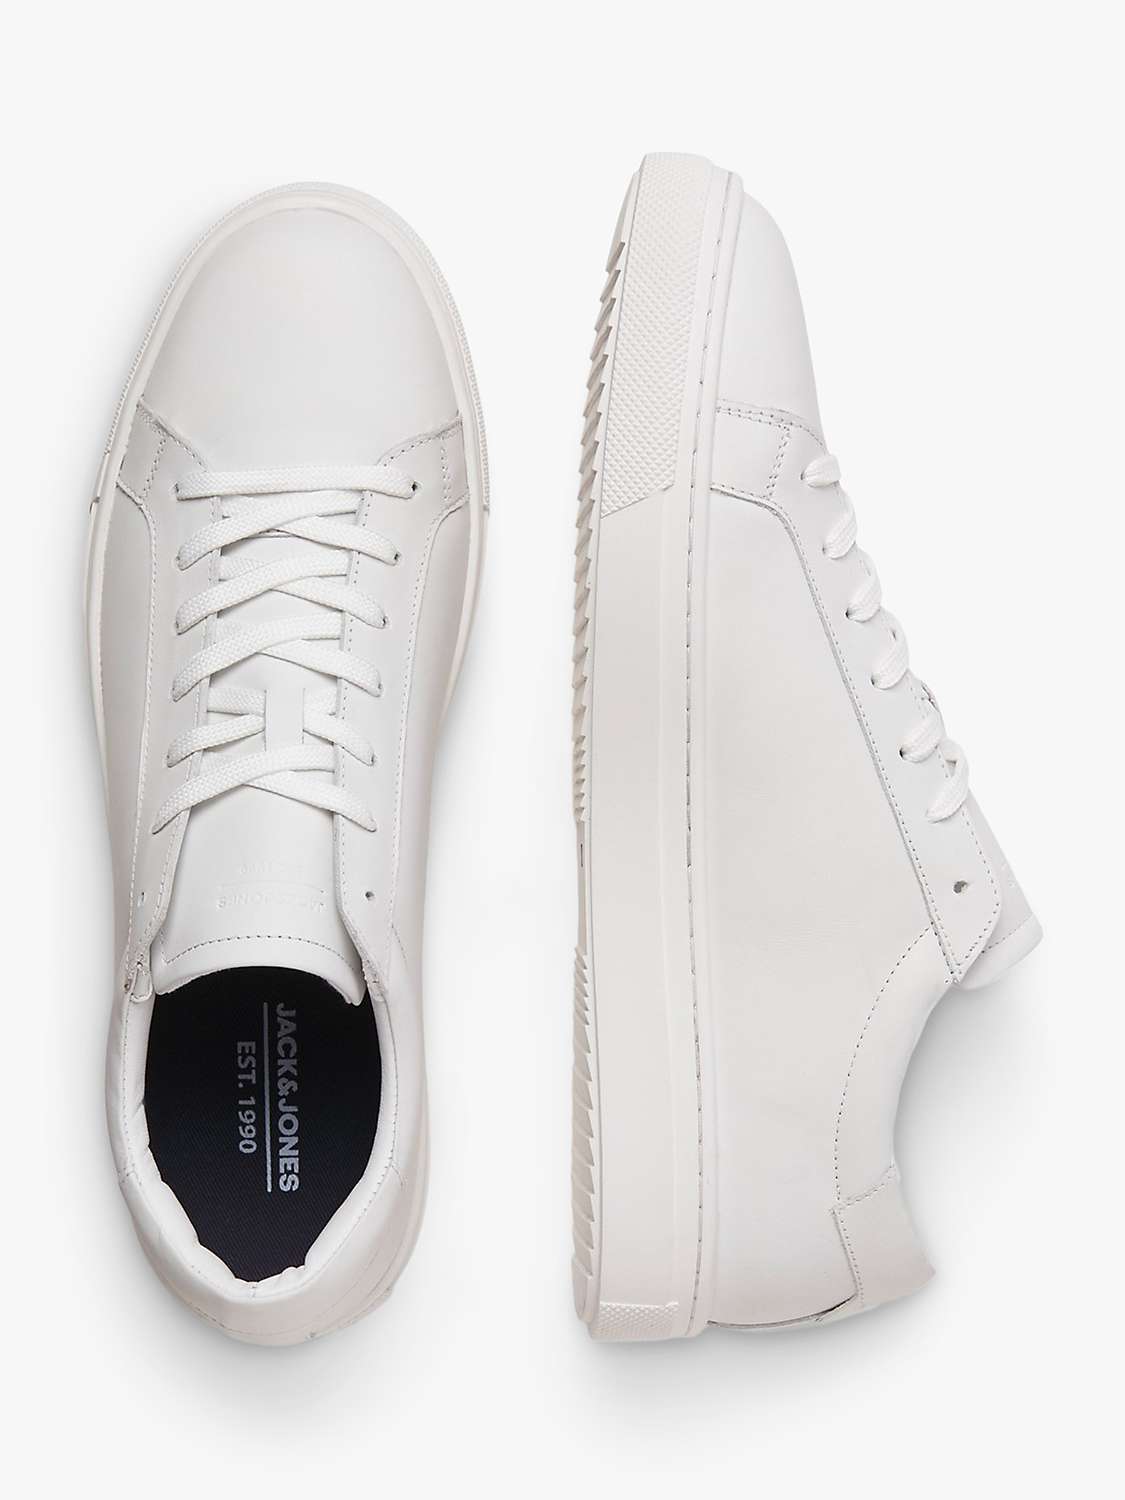 Buy Jack & Jones Radcliffe Leather Trainers, White Online at johnlewis.com